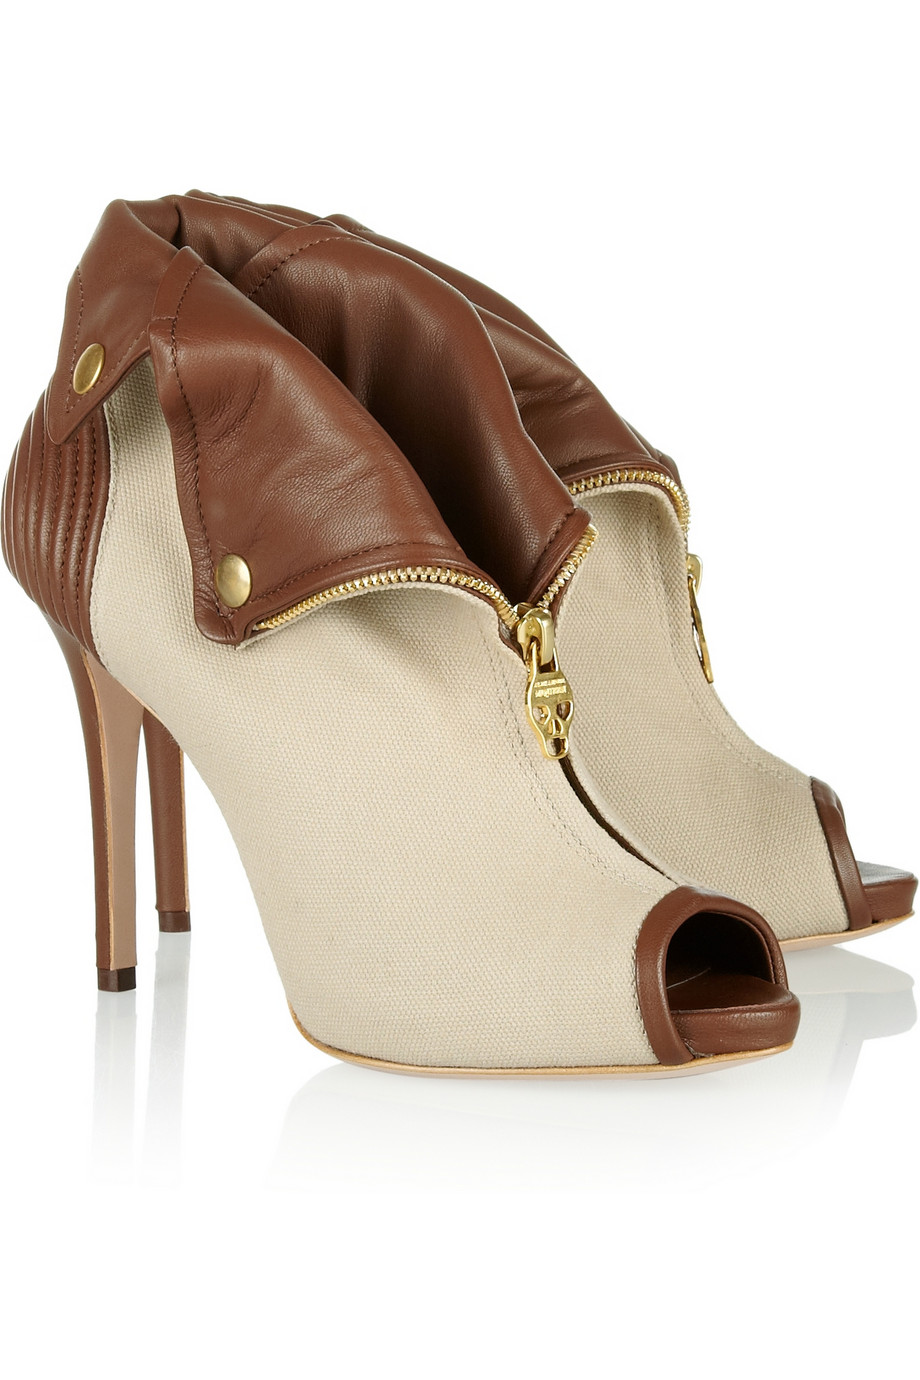 Lyst - Alexander mcqueen Two-Tone Twill And Leather Ankle Boots in Natural